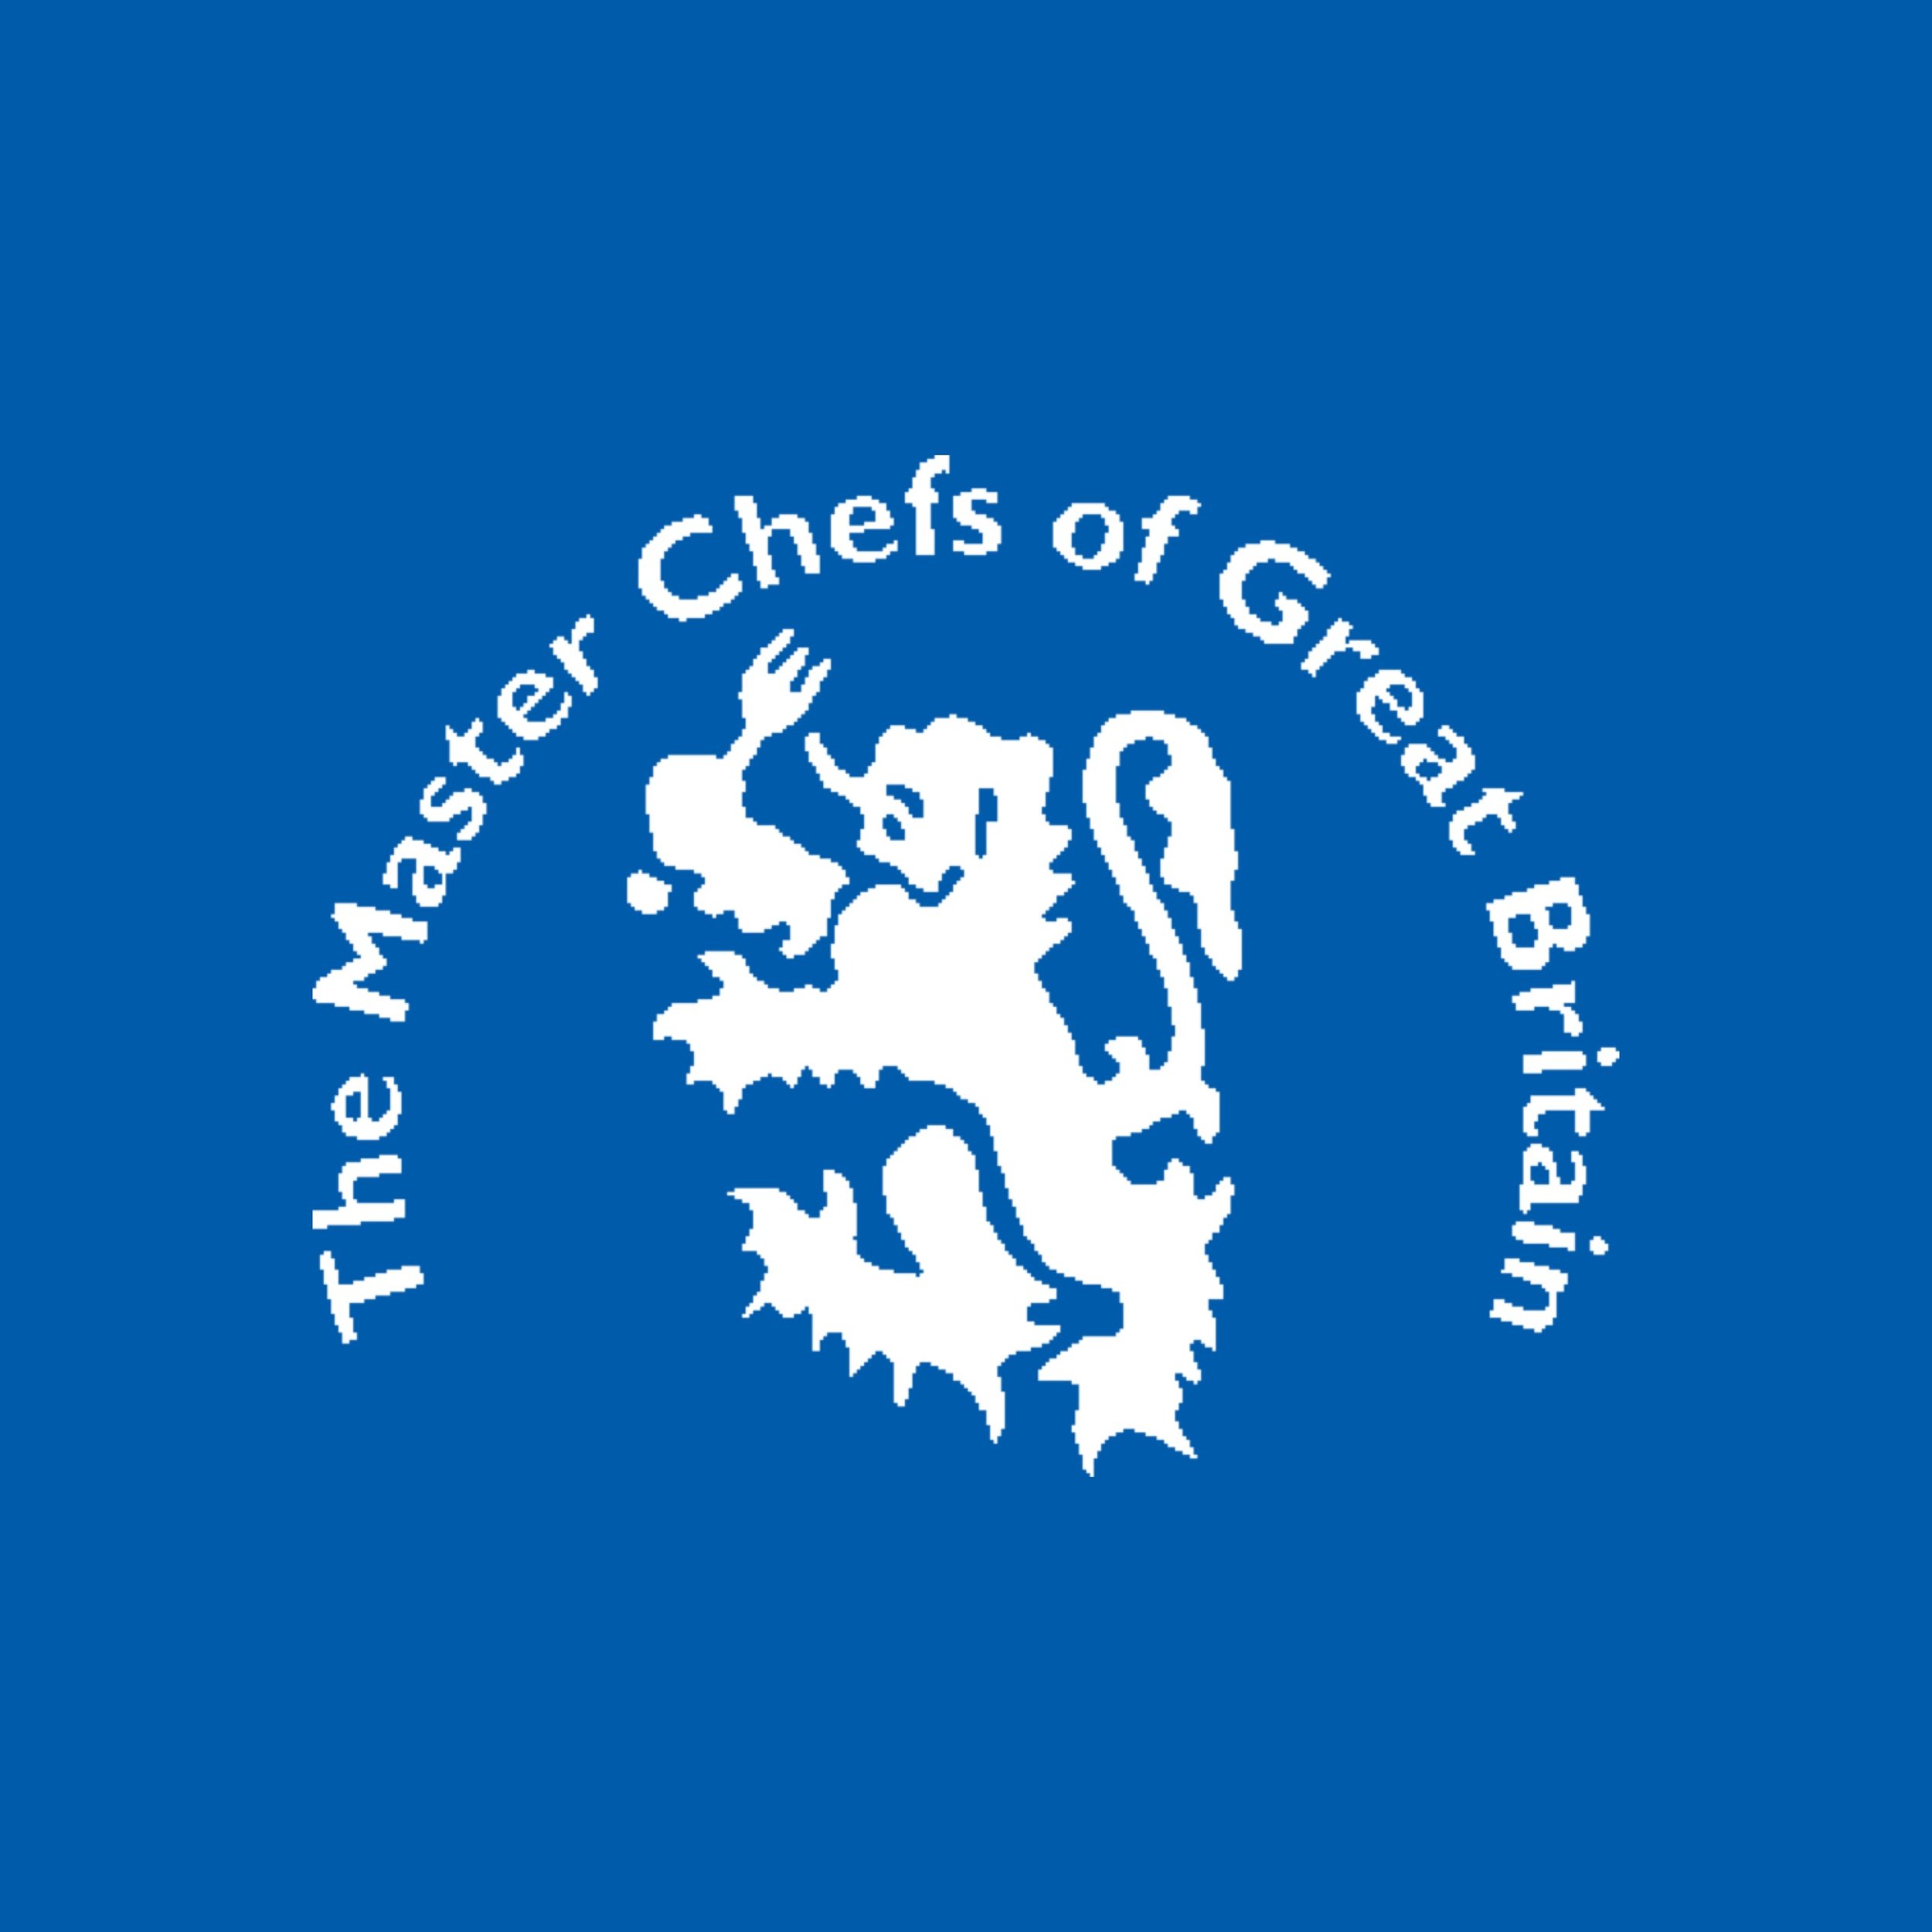 Master Chefs of Great Britain